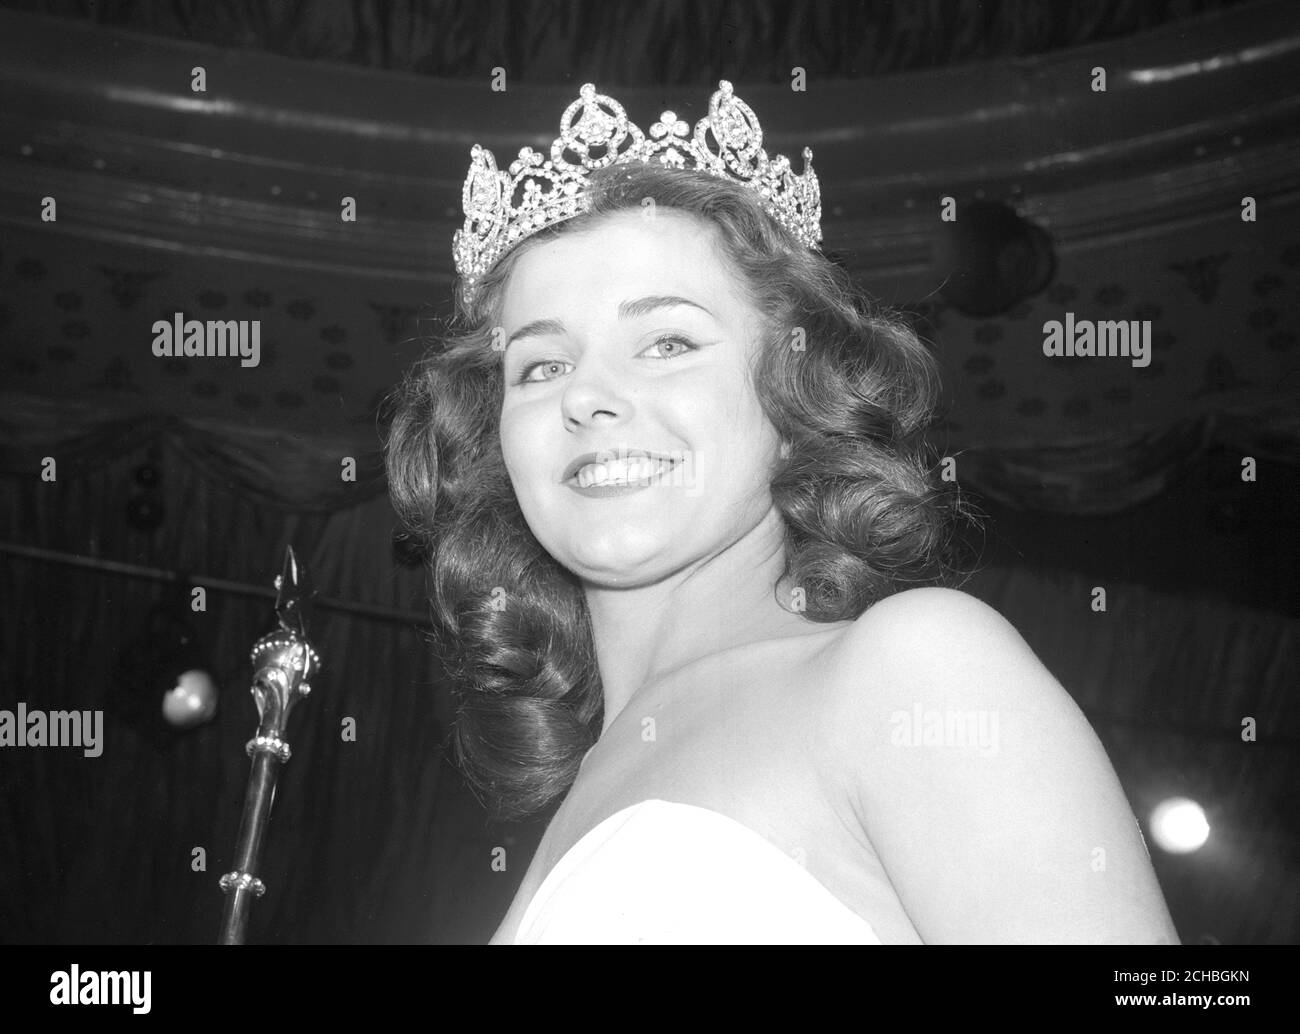 June Cooper, 16, a shop assistant from Sheffield, who has won the final of the Miss England competition at the Lyceum Ballroom, London. As Miss England, she will represent the country in the Miss Europe contest in Turkey, and the Miss Universe contest in California. Update 26/04/1958: June Cooper, 16, the Sheffield shop assistant who won the final of the Miss England competition at the Lyceum Ballroom last Tuesday. She has now resigned the title as her mother didn't wish her to go on a visit to America. Eric Morley, director of Mecca Ltd who organised the beauty contest, said a new election wo Stock Photo